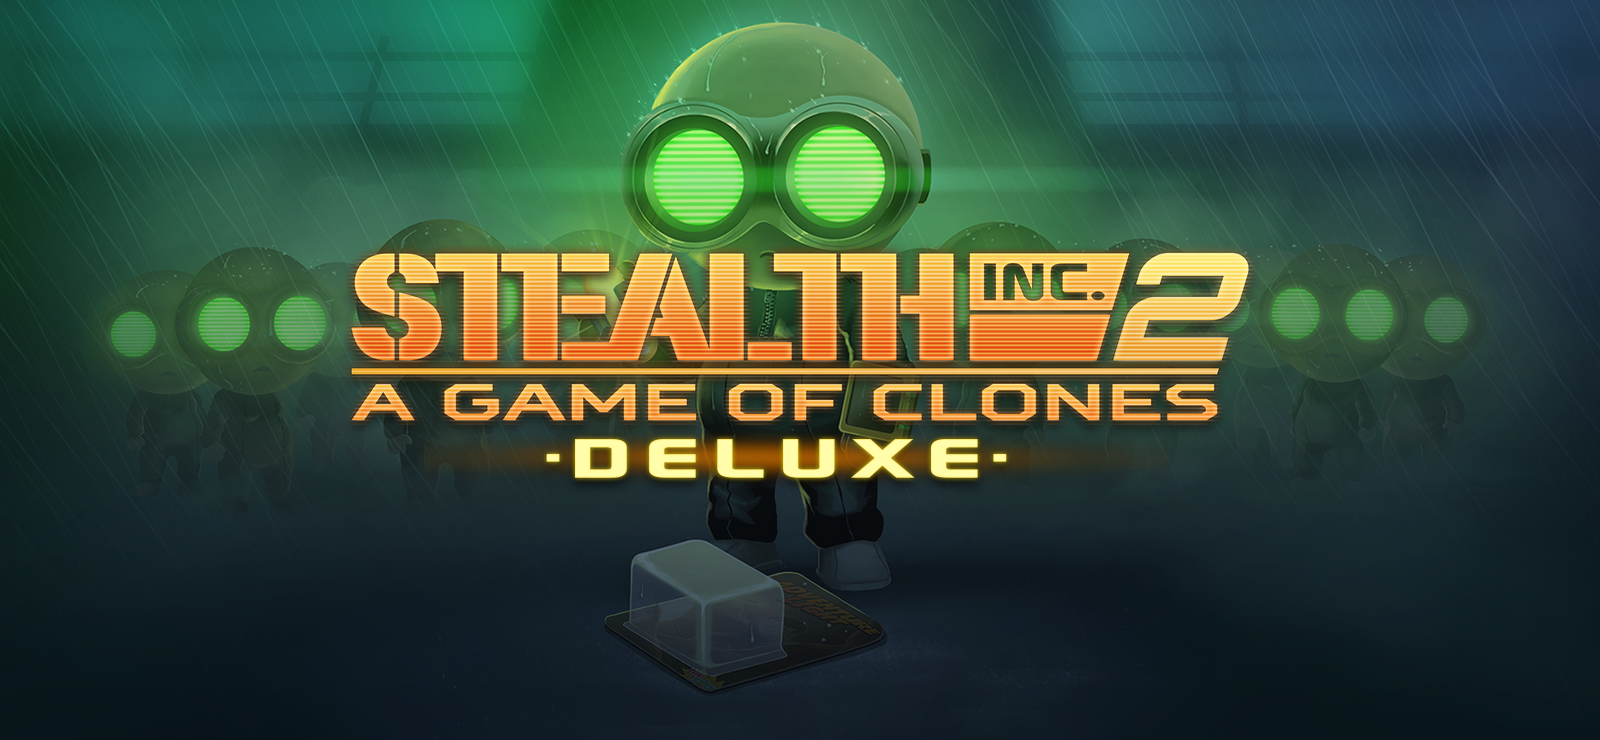 Stealth Inc. 2: A Game Of Clones Deluxe